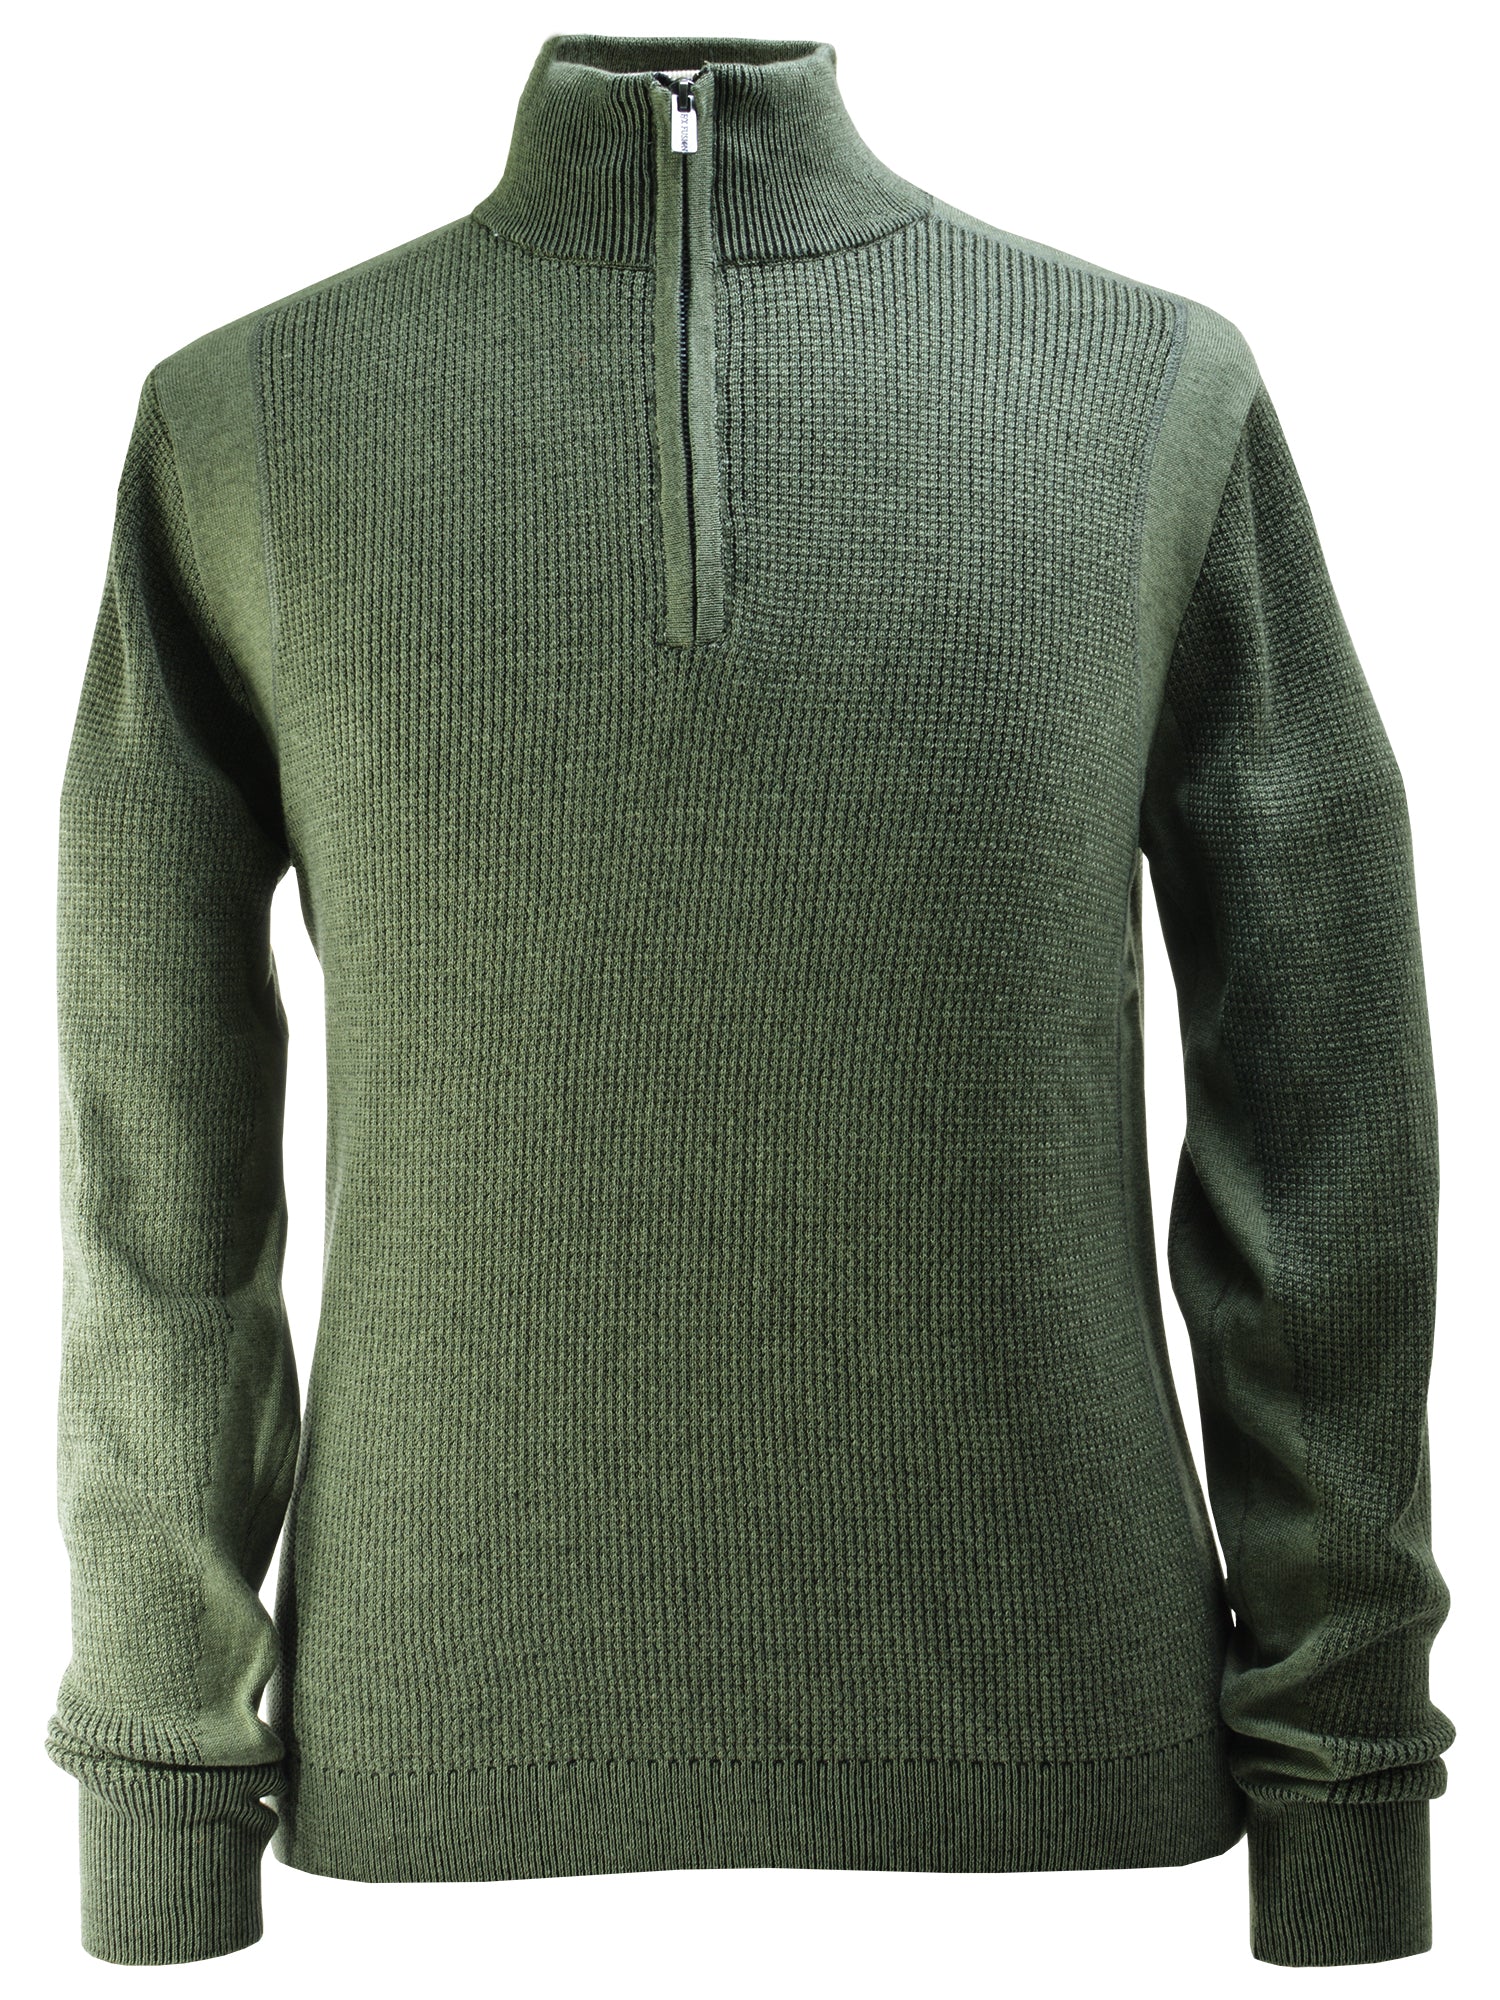 F/X Fusion Plaited Thermal Sweater in Greenstone